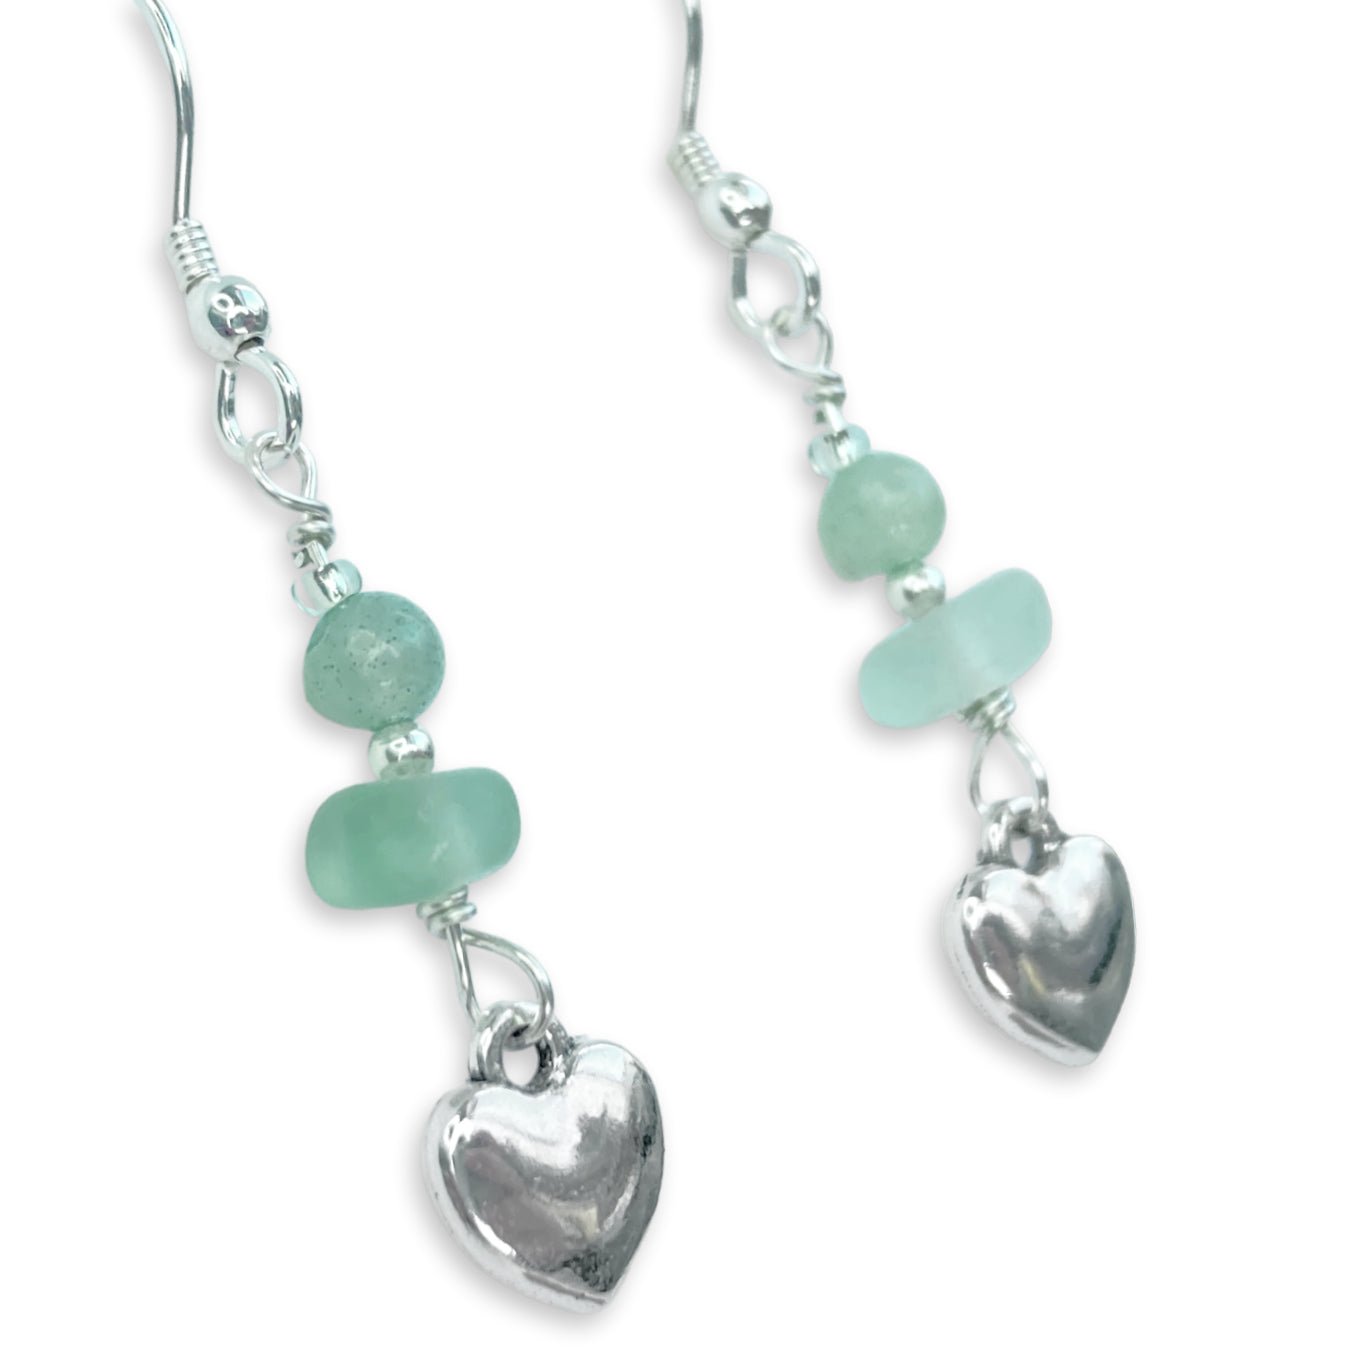 Heart Earrings - Green Sea Glass & Silver Jewellery with Amazonite Crystal Beads - East Neuk Beach Crafts